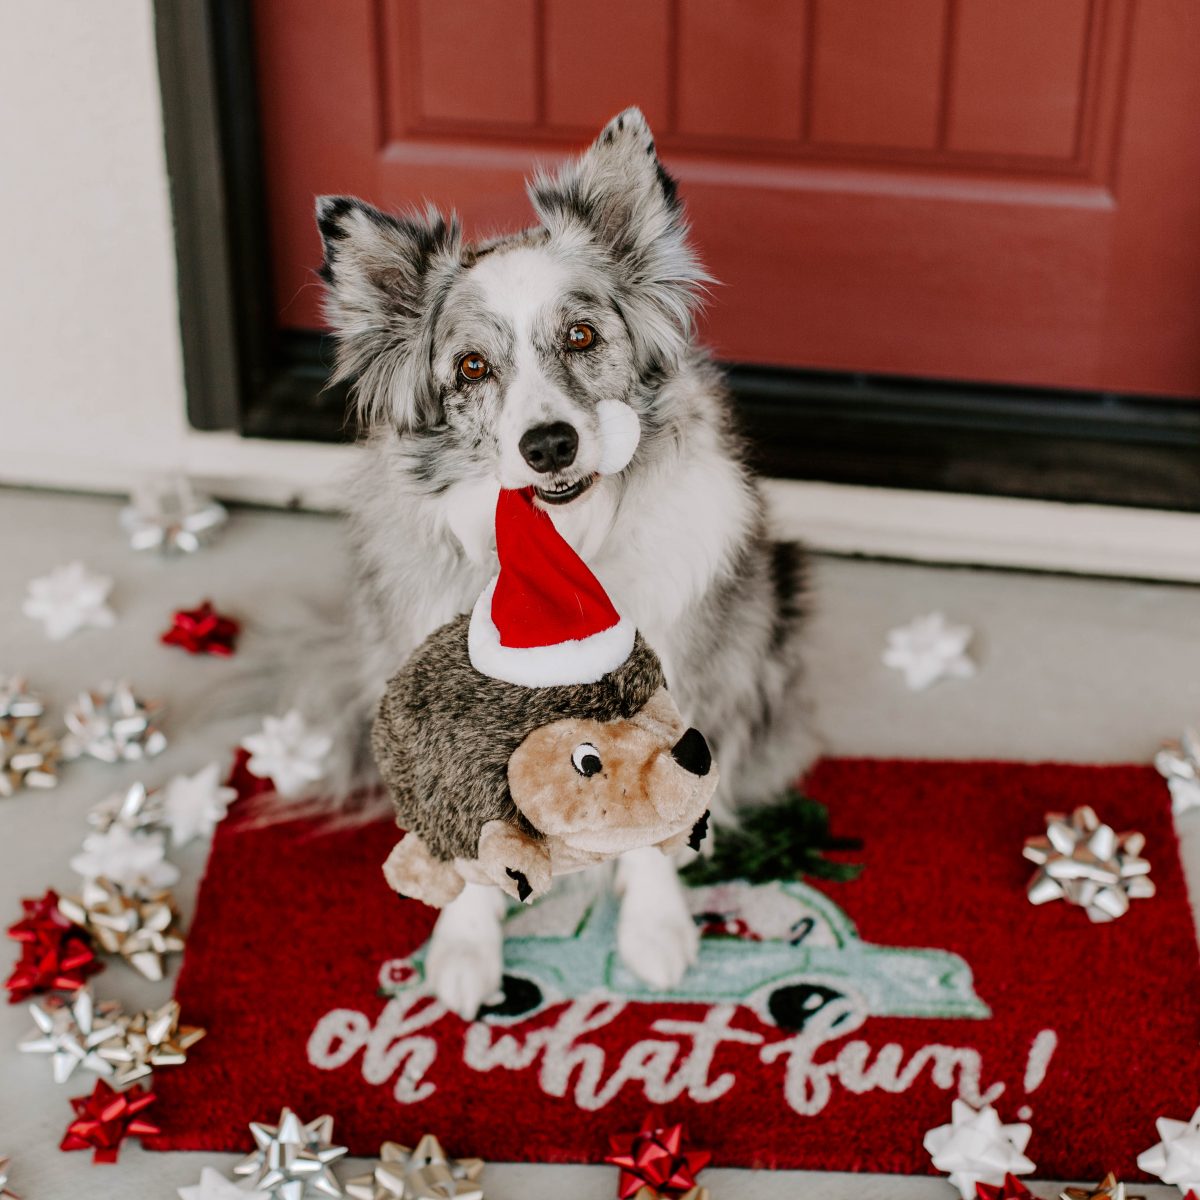 2021 Holiday Gift Guide: Christmas Gifts for Dogs